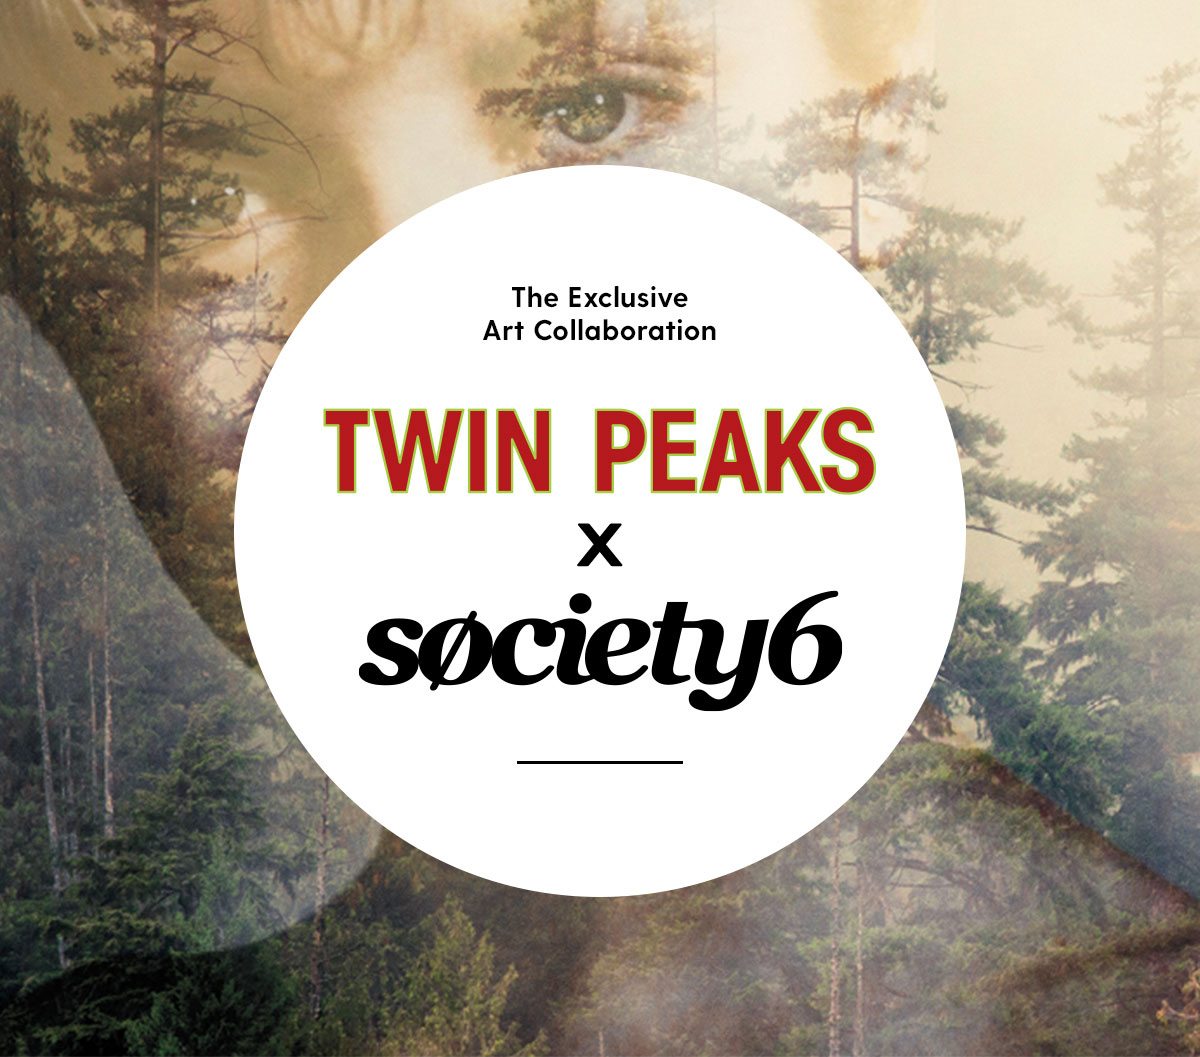 An Exclusive Art Collaboration: Twin Peaks x Society6